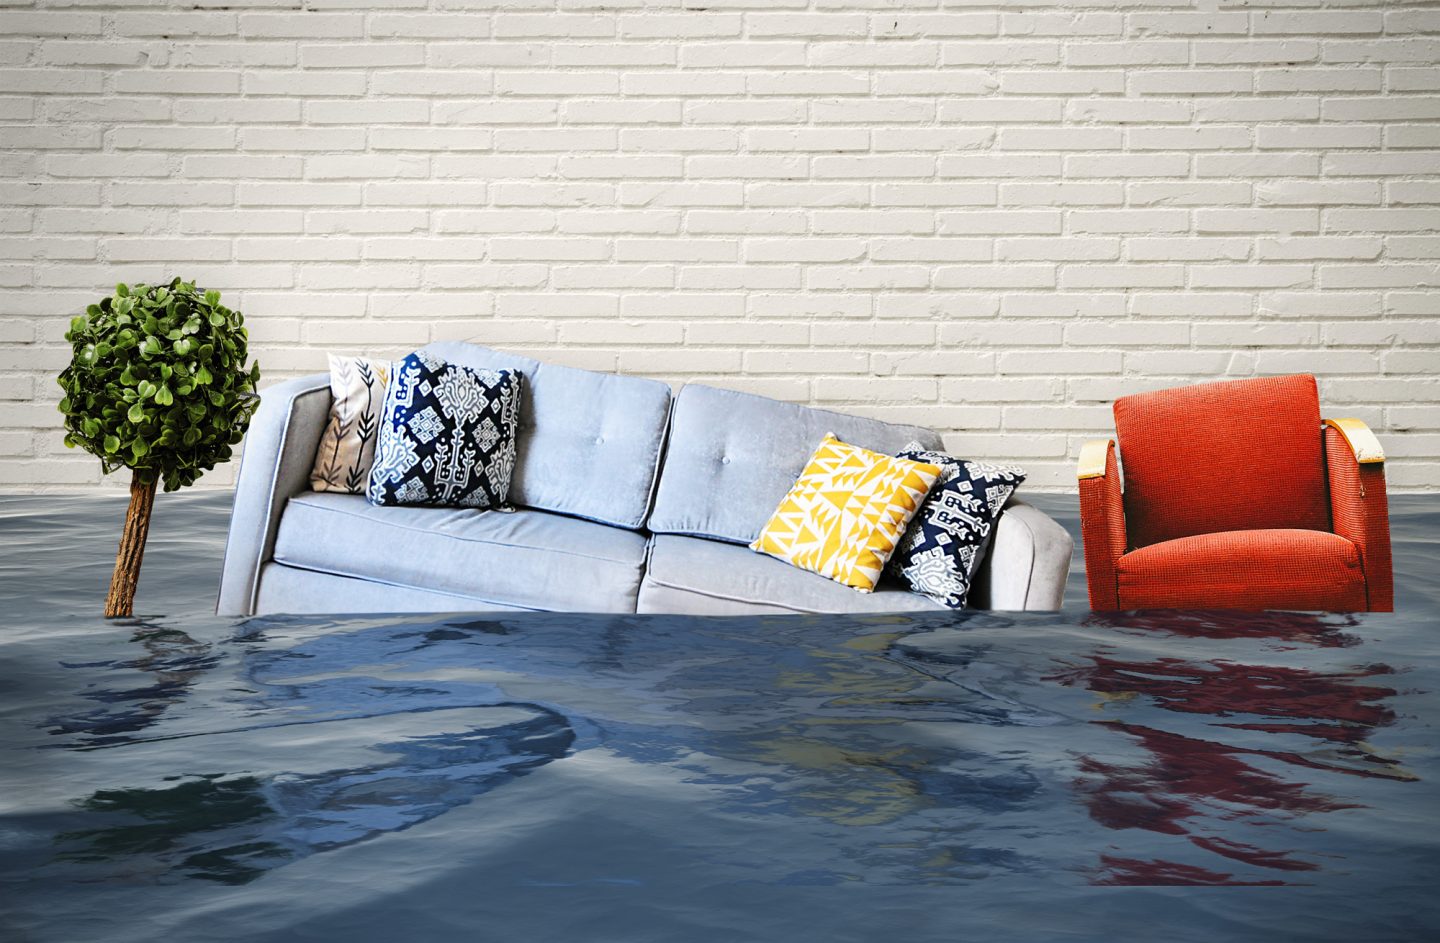 5 Tips for Water Damage Repair and Prevention